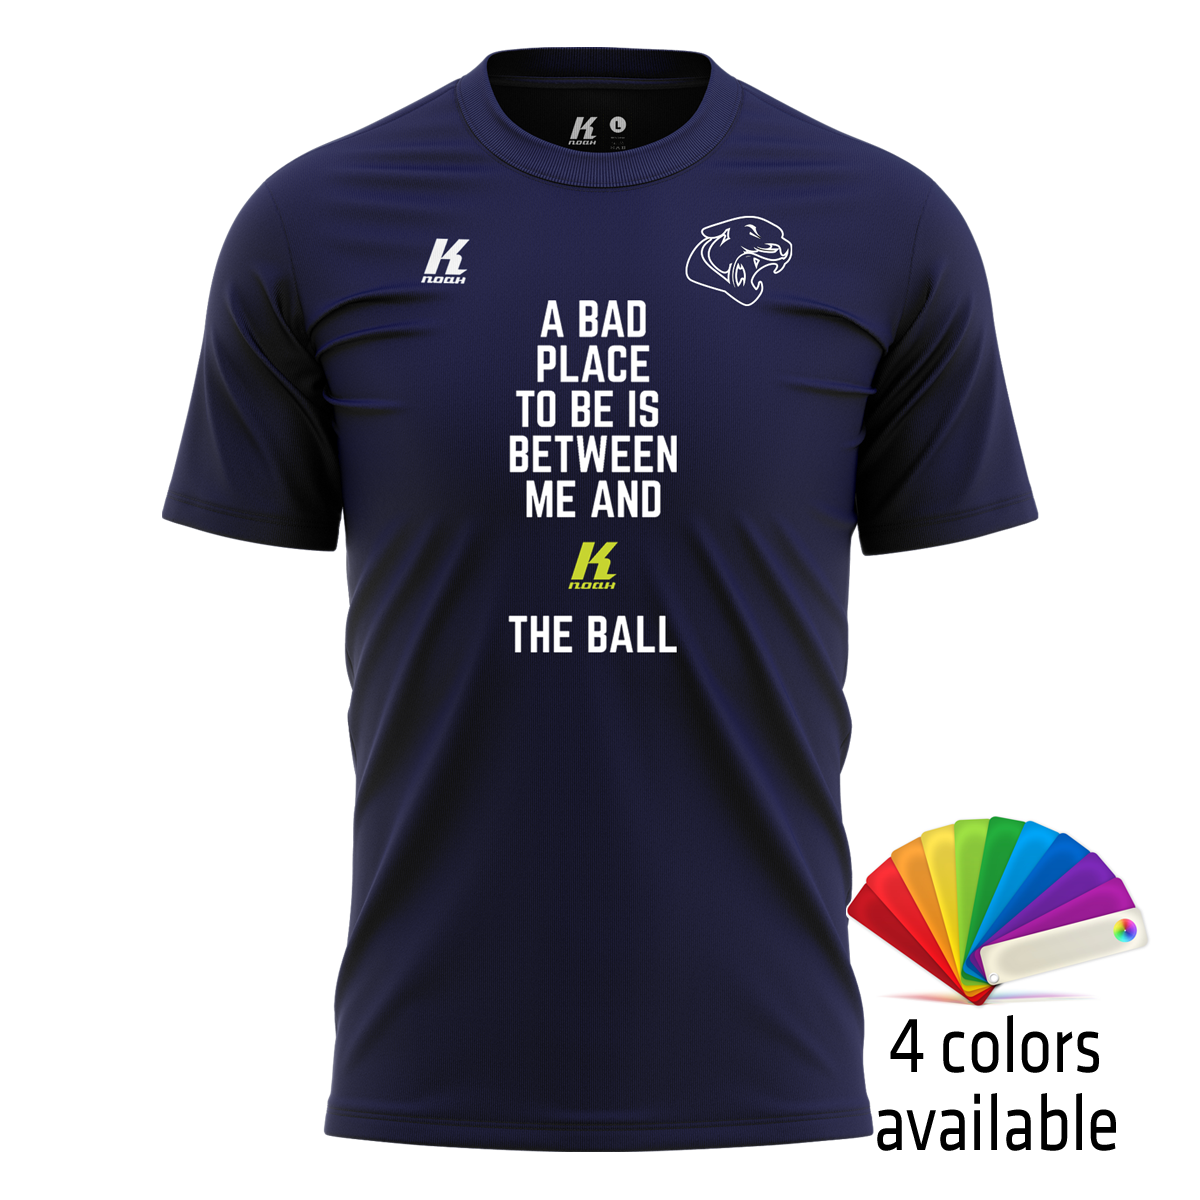 Cougars Footballmary T-Shirt "A Bad Place To Be..."